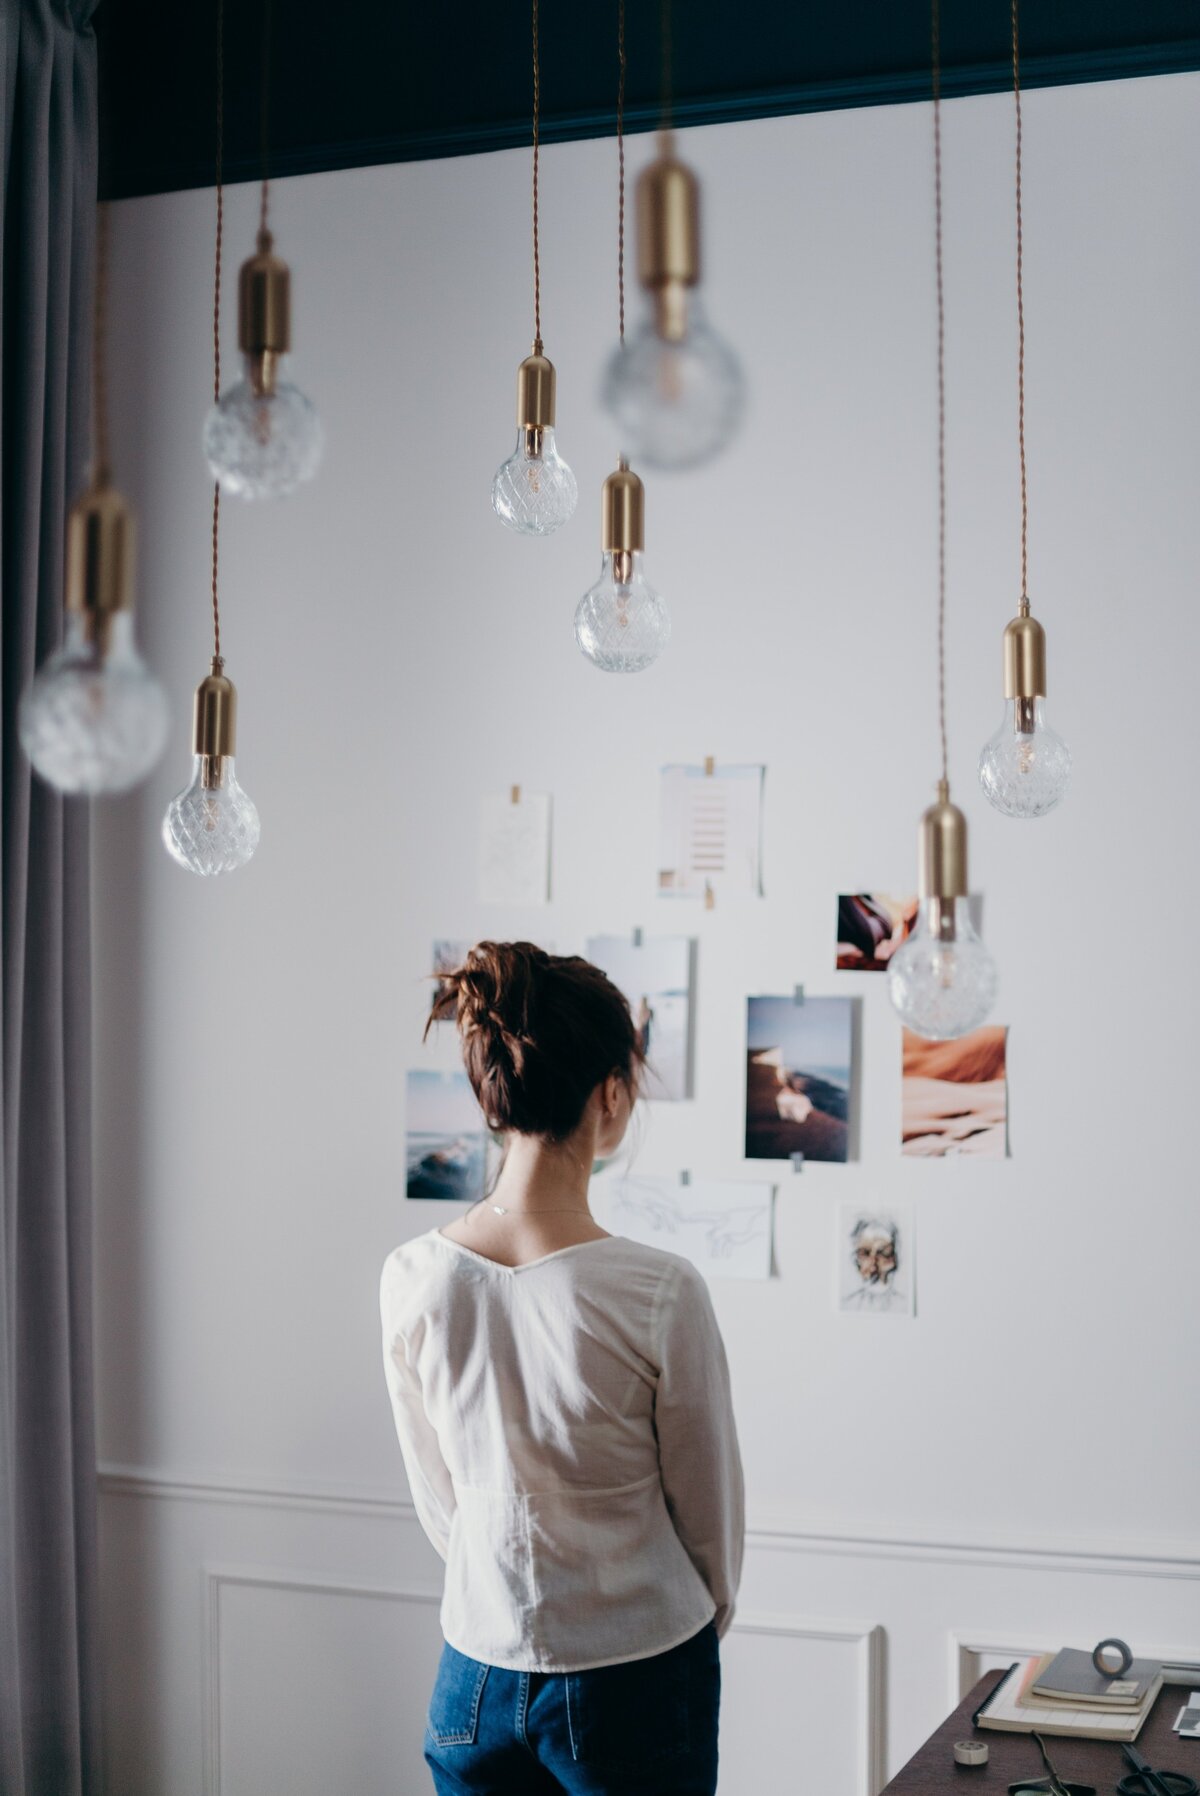 woman-under-pendant-lights-looking-at-the-photo-on-the-wall-3584992